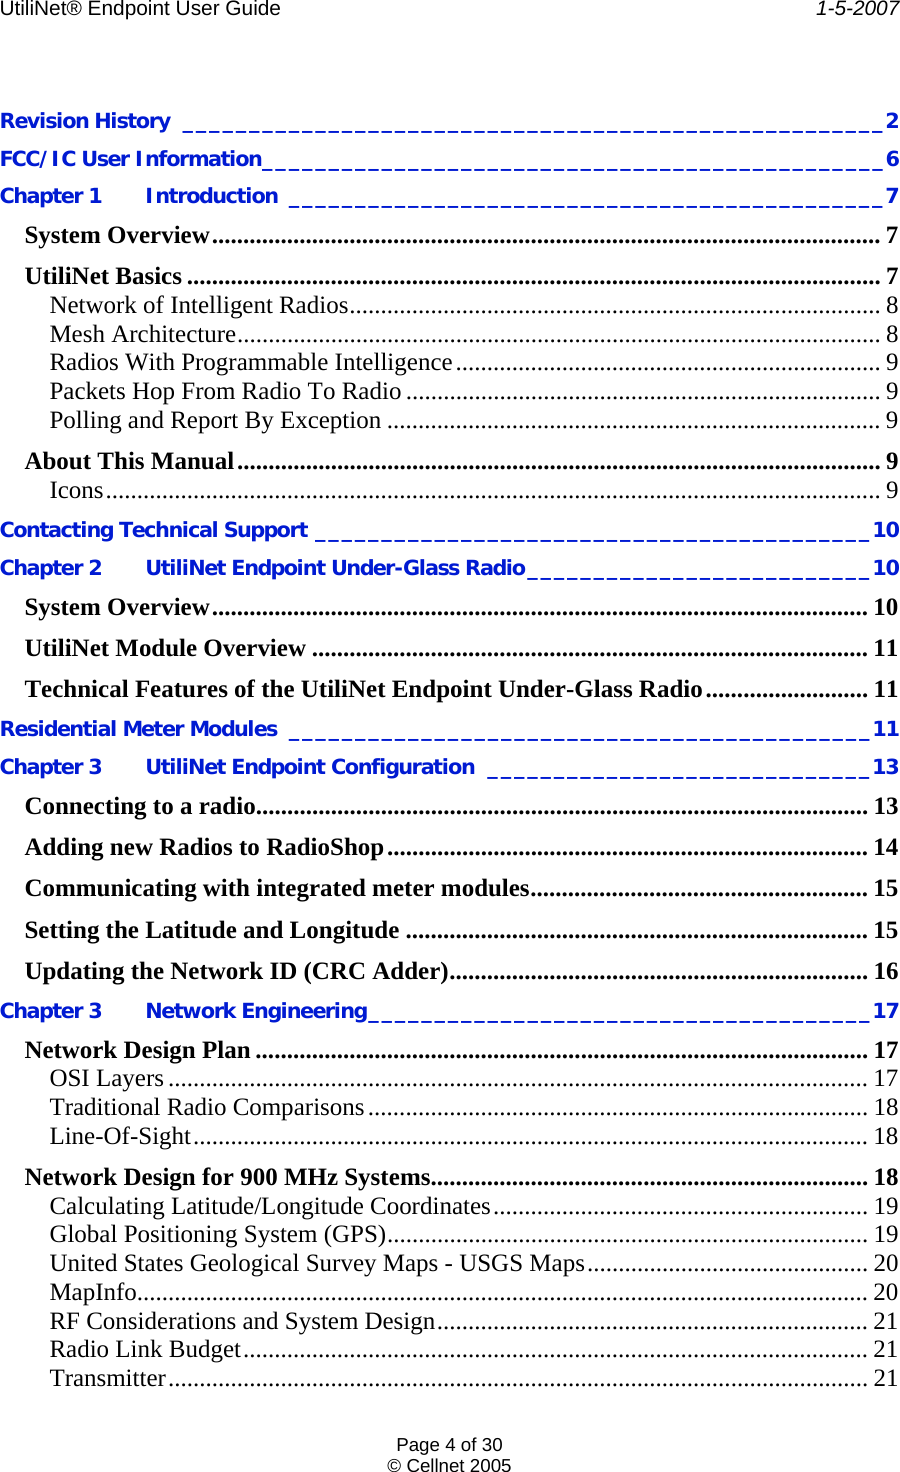 UtiliNet® Endpoint User Guide    1-5-2007 Page 4 of 30 © Cellnet 2005   Revision History _____________________________________________________2 FCC/IC User Information_______________________________________________6 Chapter 1  Introduction _____________________________________________7 System Overview........................................................................................................... 7 UtiliNet Basics ............................................................................................................... 7 Network of Intelligent Radios..................................................................................... 8 Mesh Architecture....................................................................................................... 8 Radios With Programmable Intelligence.................................................................... 9 Packets Hop From Radio To Radio ............................................................................ 9 Polling and Report By Exception ............................................................................... 9 About This Manual....................................................................................................... 9 Icons............................................................................................................................ 9 Contacting Technical Support __________________________________________10 Chapter 2 UtiliNet Endpoint Under-Glass Radio__________________________10 System Overview......................................................................................................... 10 UtiliNet Module Overview ......................................................................................... 11 Technical Features of the UtiliNet Endpoint Under-Glass Radio.......................... 11 Residential Meter Modules ____________________________________________11 Chapter 3 UtiliNet Endpoint Configuration _____________________________13 Connecting to a radio.................................................................................................. 13 Adding new Radios to RadioShop............................................................................. 14 Communicating with integrated meter modules...................................................... 15 Setting the Latitude and Longitude .......................................................................... 15 Updating the Network ID (CRC Adder)................................................................... 16 Chapter 3  Network Engineering______________________________________17 Network Design Plan .................................................................................................. 17 OSI Layers ................................................................................................................ 17 Traditional Radio Comparisons................................................................................ 18 Line-Of-Sight............................................................................................................ 18 Network Design for 900 MHz Systems...................................................................... 18 Calculating Latitude/Longitude Coordinates............................................................ 19 Global Positioning System (GPS)............................................................................. 19 United States Geological Survey Maps - USGS Maps............................................. 20 MapInfo..................................................................................................................... 20 RF Considerations and System Design..................................................................... 21 Radio Link Budget.................................................................................................... 21 Transmitter................................................................................................................ 21 